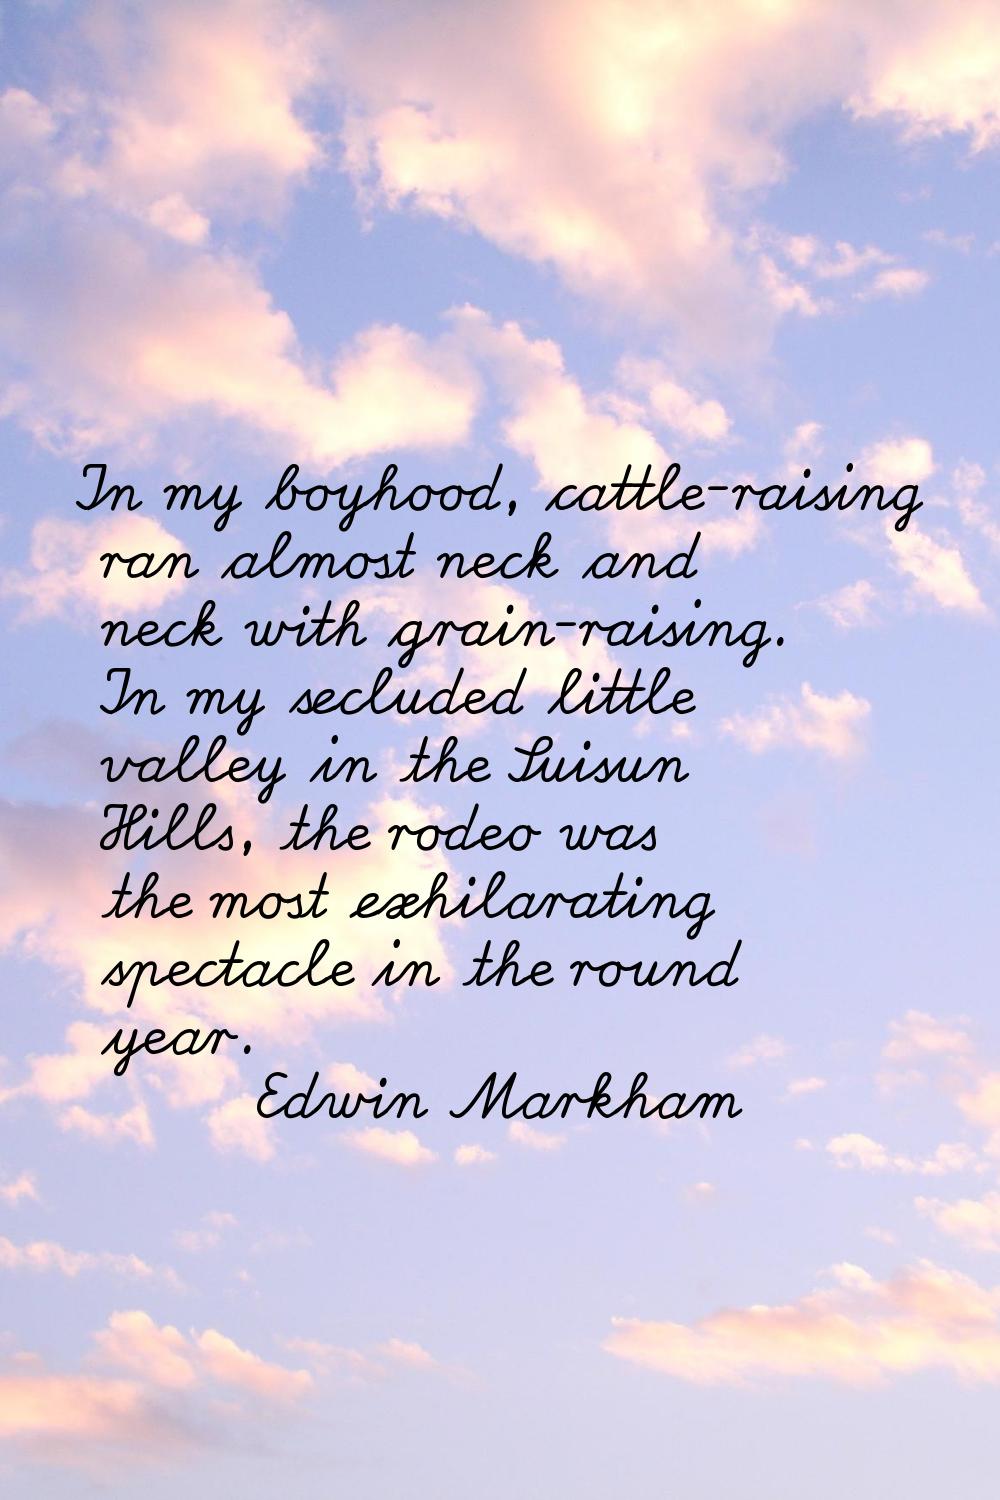 In my boyhood, cattle-raising ran almost neck and neck with grain-raising. In my secluded little va